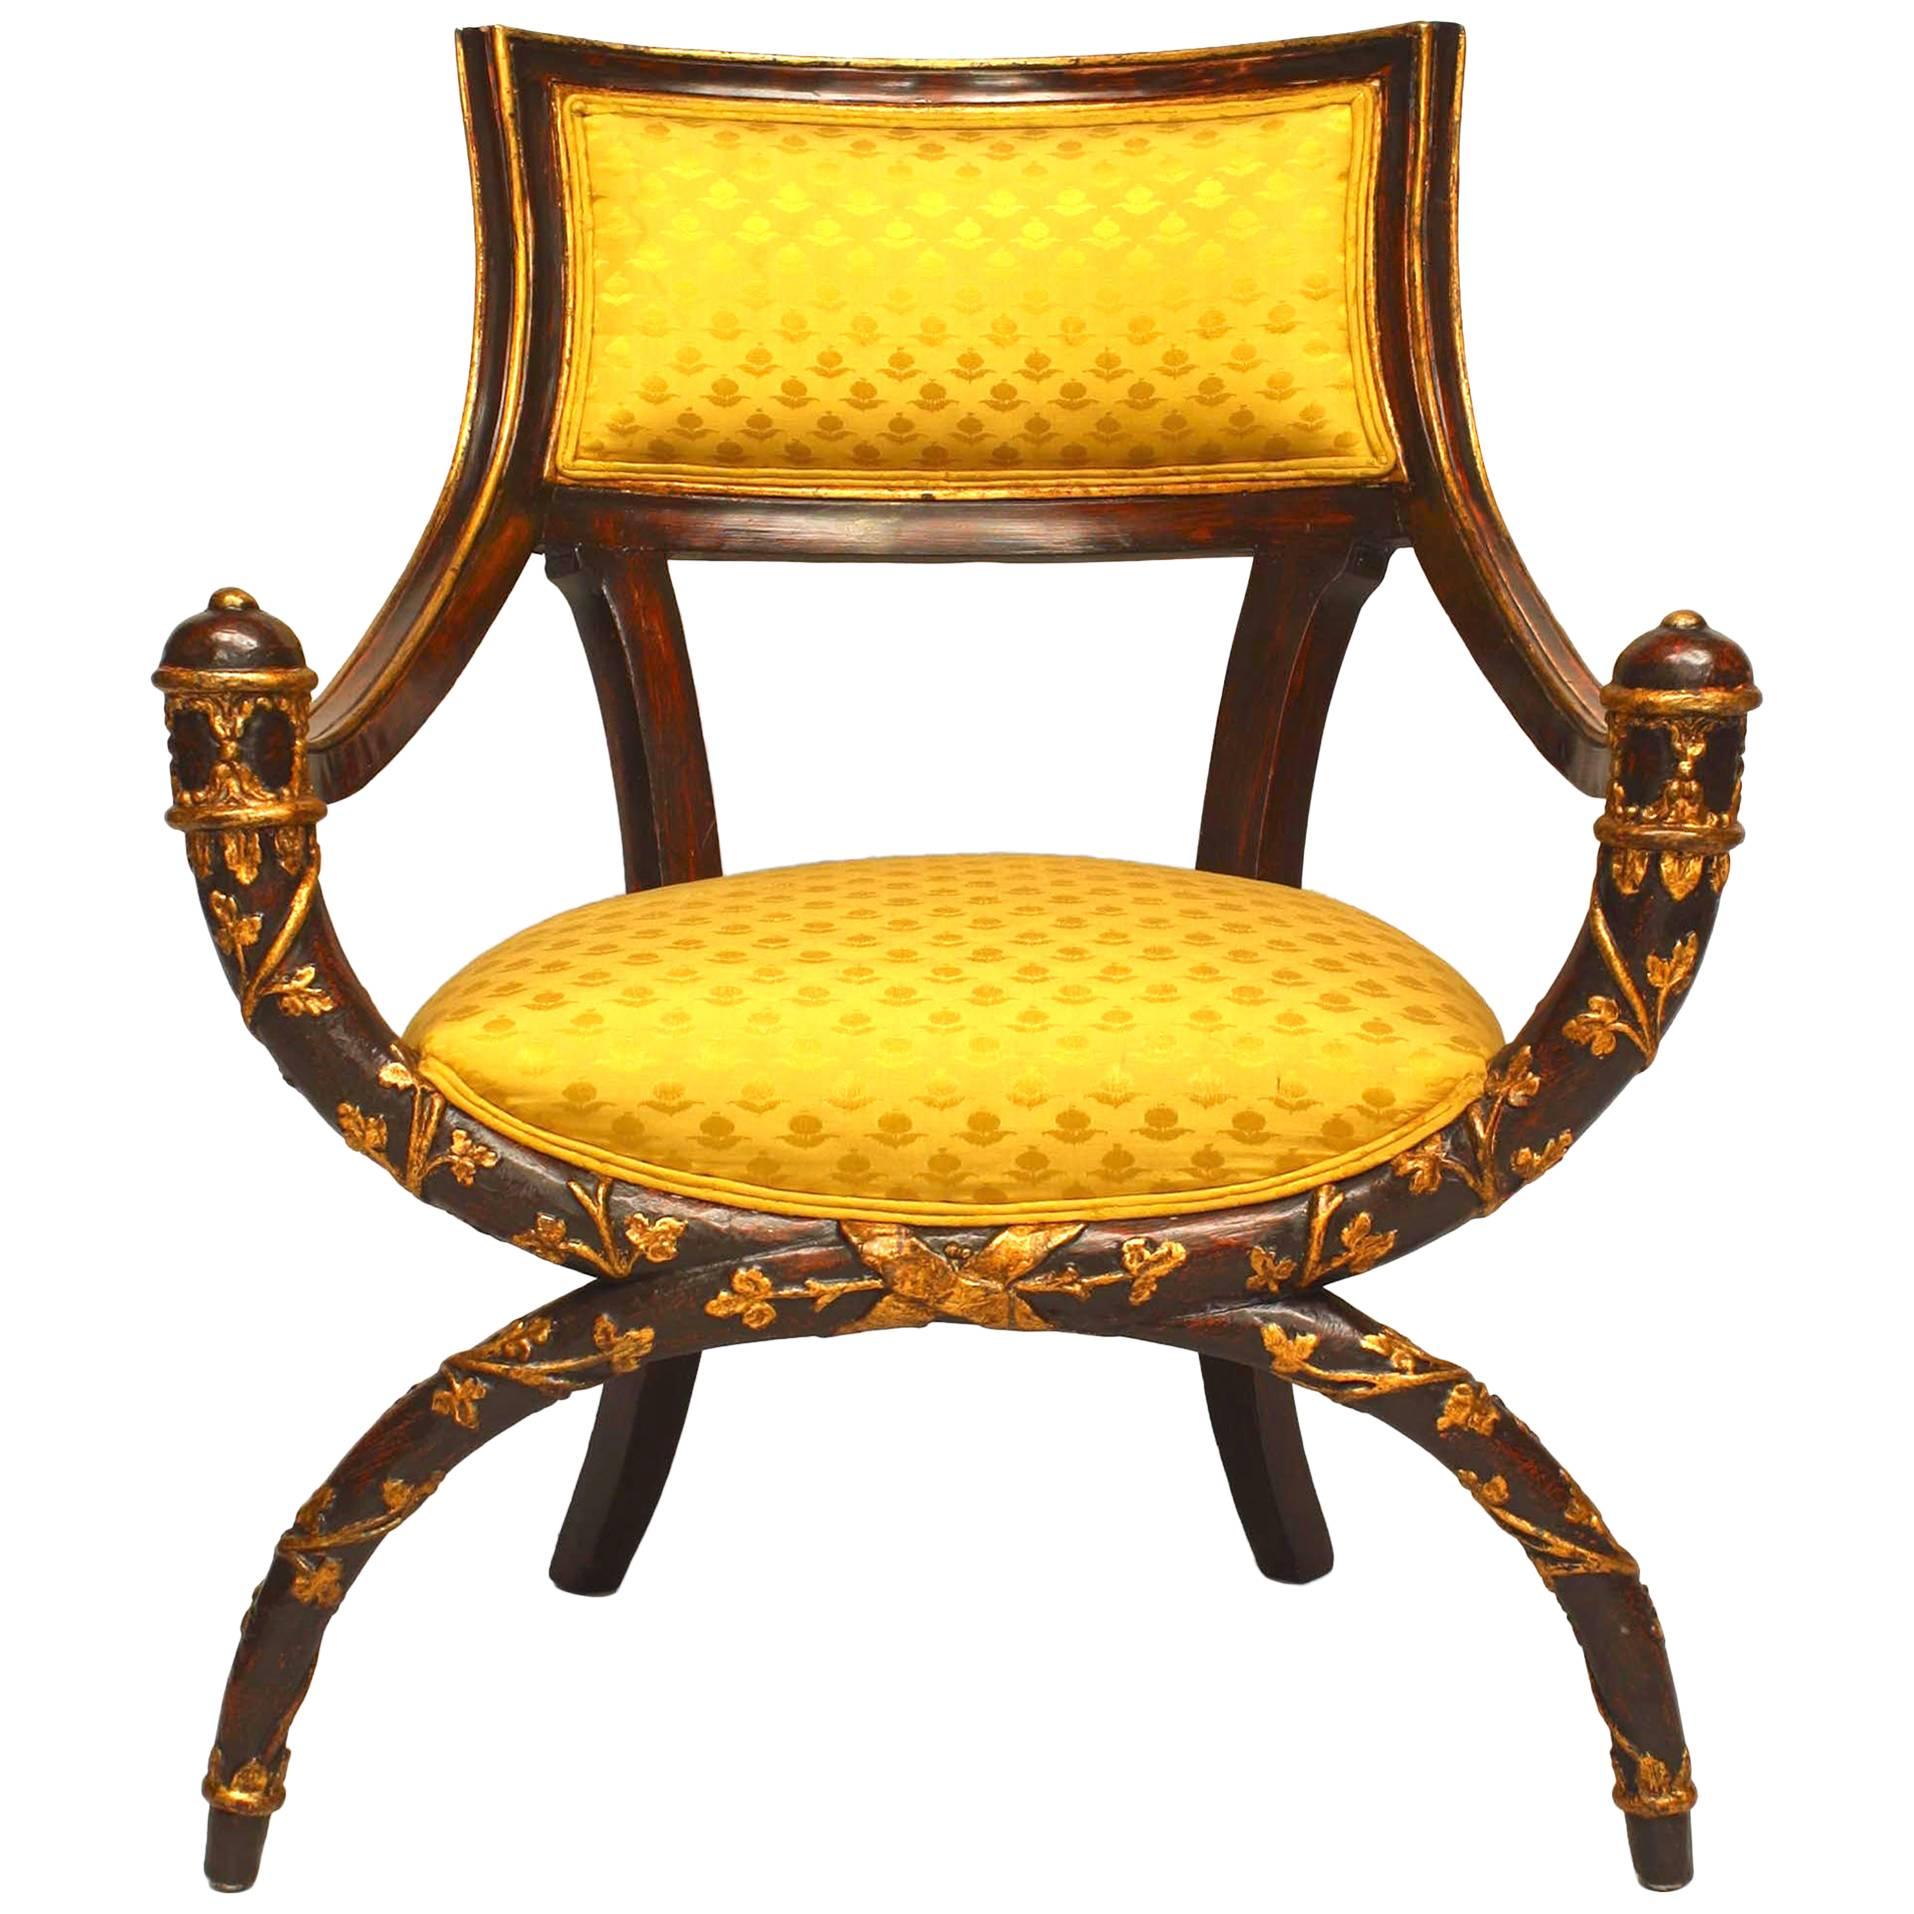 Italian Neoclassic Maroon Lacquer and Gold Damask Upholstery Armchair For Sale